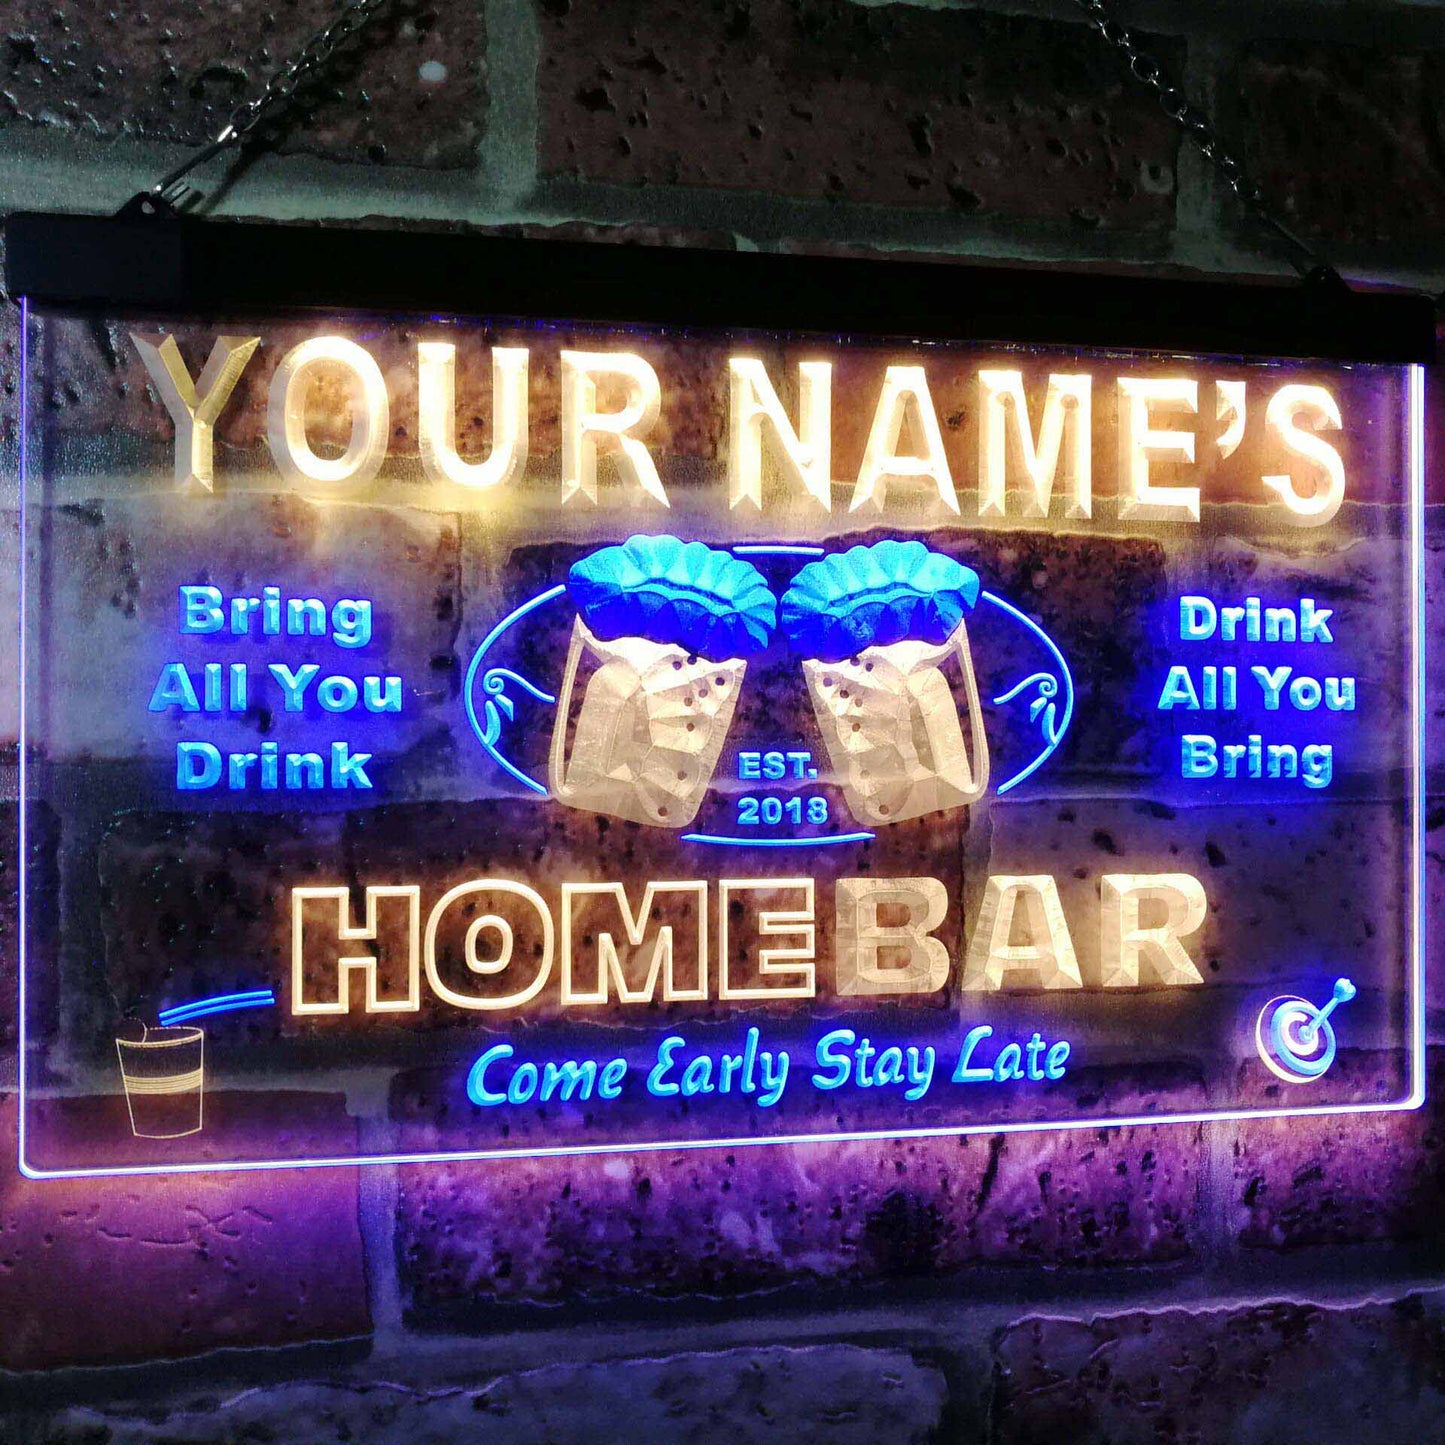 Personalized Beer Mug Two Colors LED Home Bar Sign (Three Sizes) LED Signs - The Beer Lodge